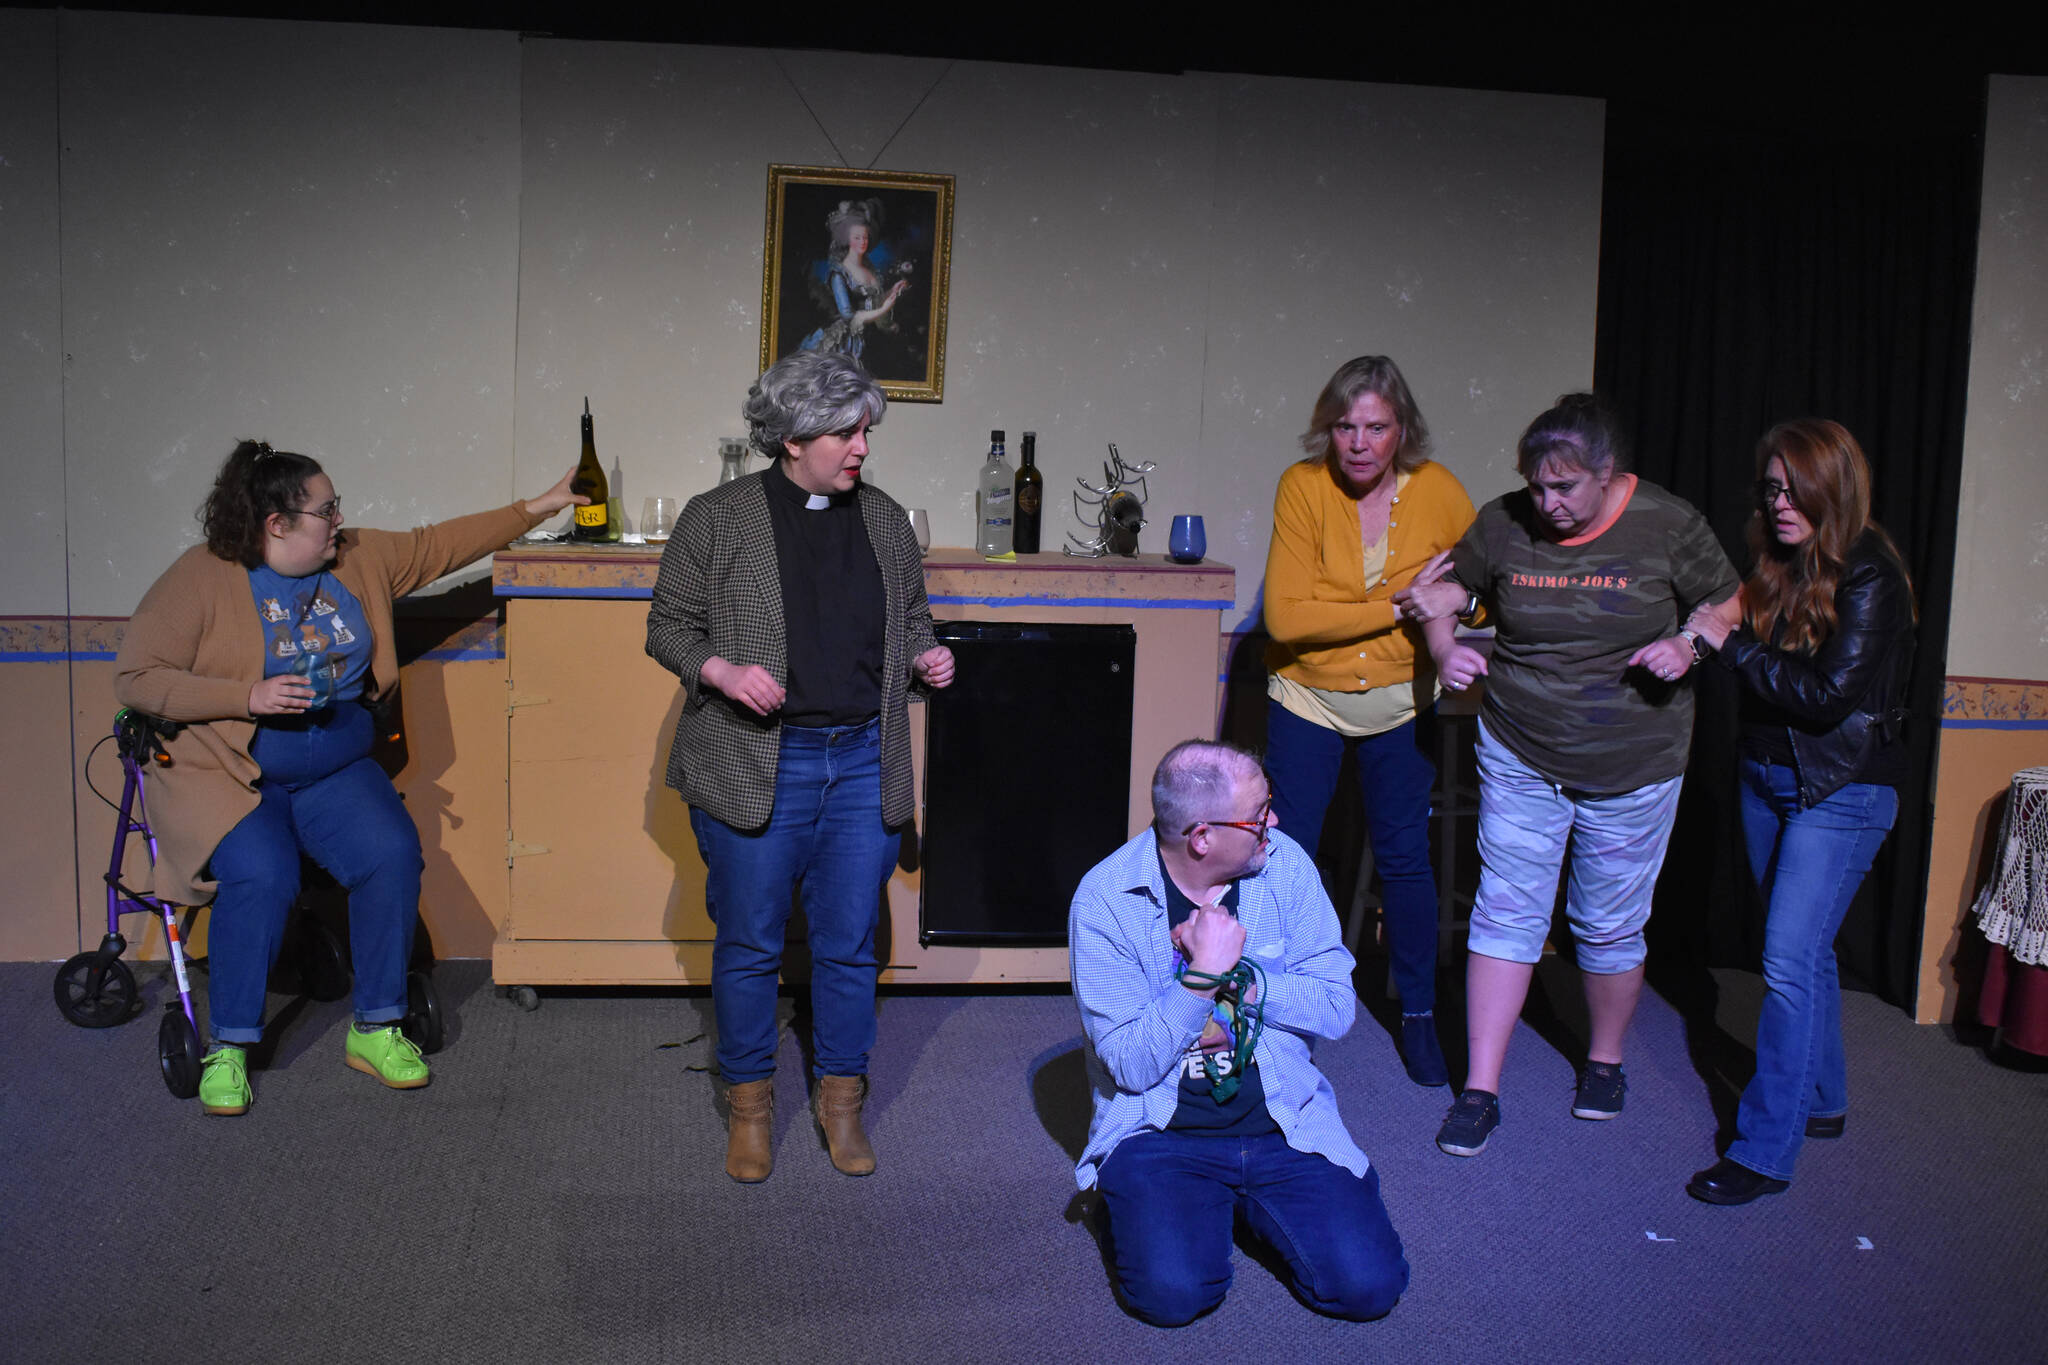 Nikki Stein, Lacey Jane Brewster, Terri Zopf-Schoessler, Donna Shirnberg, Tracie Sanborn and Bill Taylor act during a rehearsal of “Menopause Made Me Do It” on Tuesday, Sept. 13, 2022, in Soldotna, Alaska. (Jake Dye/Peninsula Clarion)